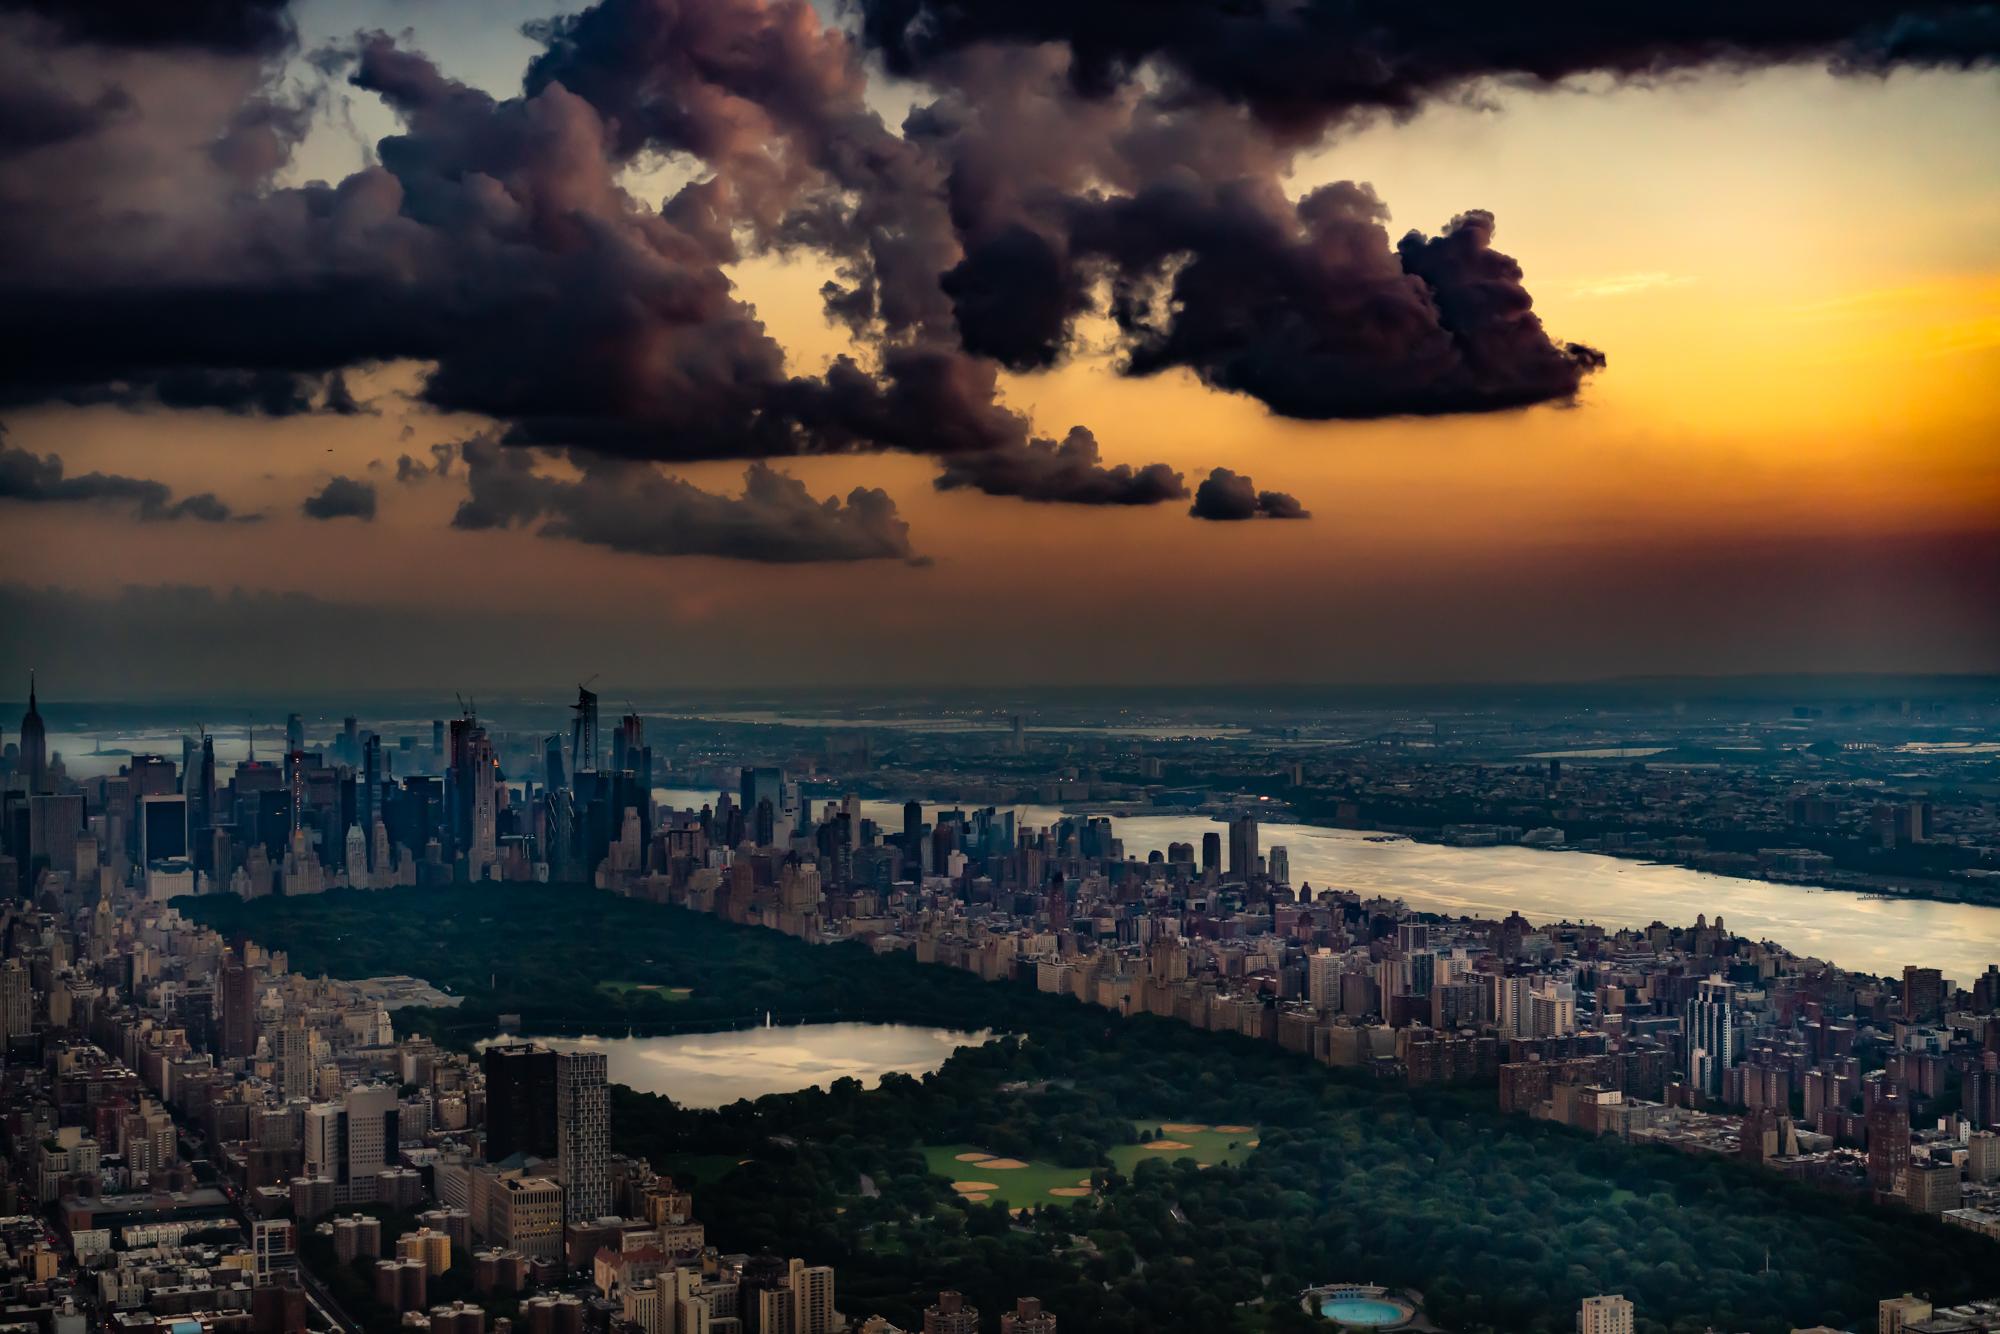 Limited Edition Color Photograph 1 / 3 - New York aerial, Central Park, 2018. When the ban on taking the doors off of helicopters for photography was lifted I flew over New York City late in the day just after storms had passed. Central Park with